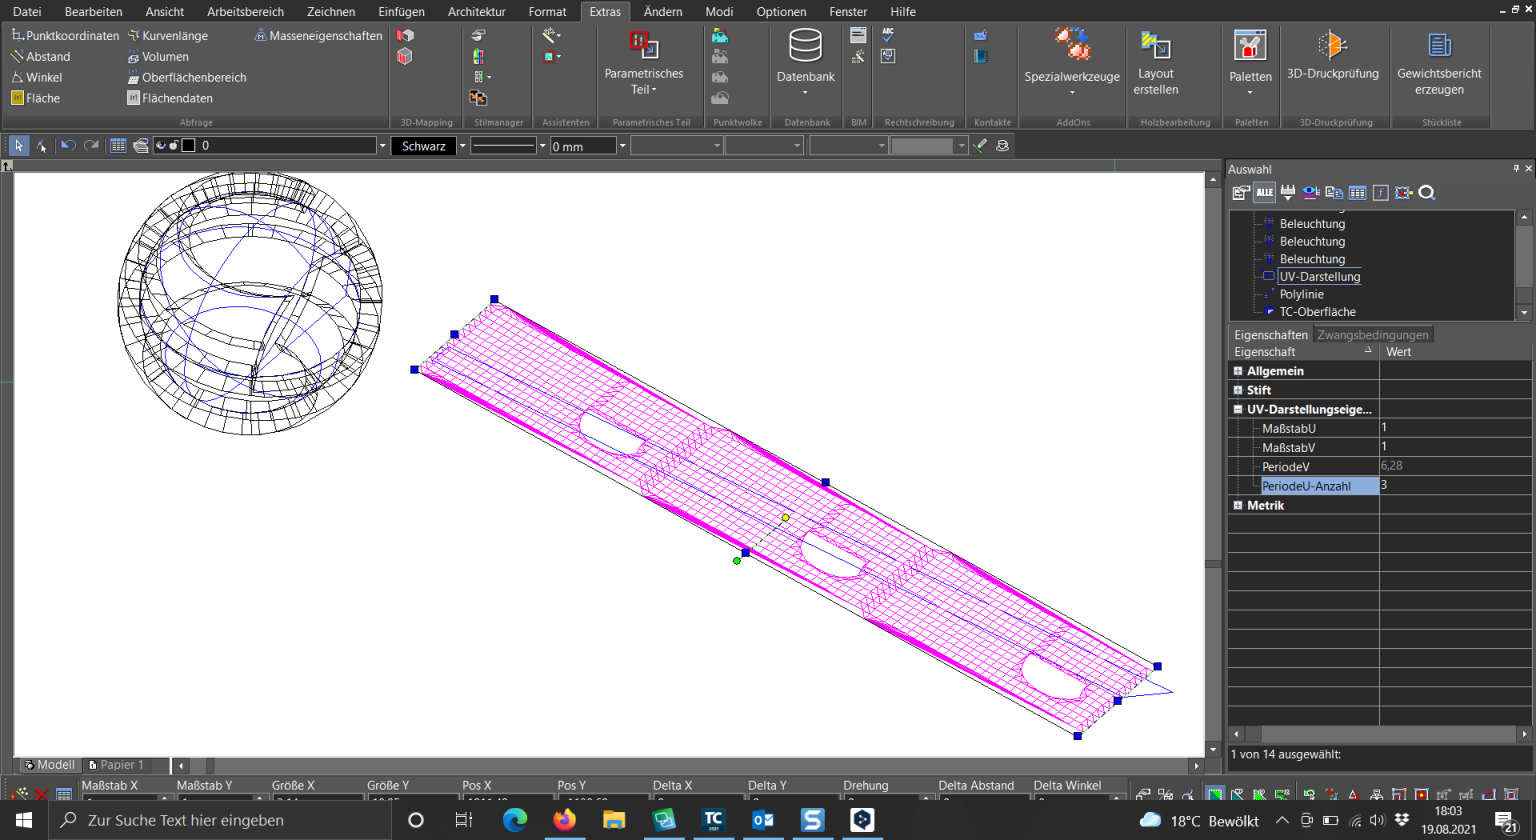 TurboCAD 3D-Mapping